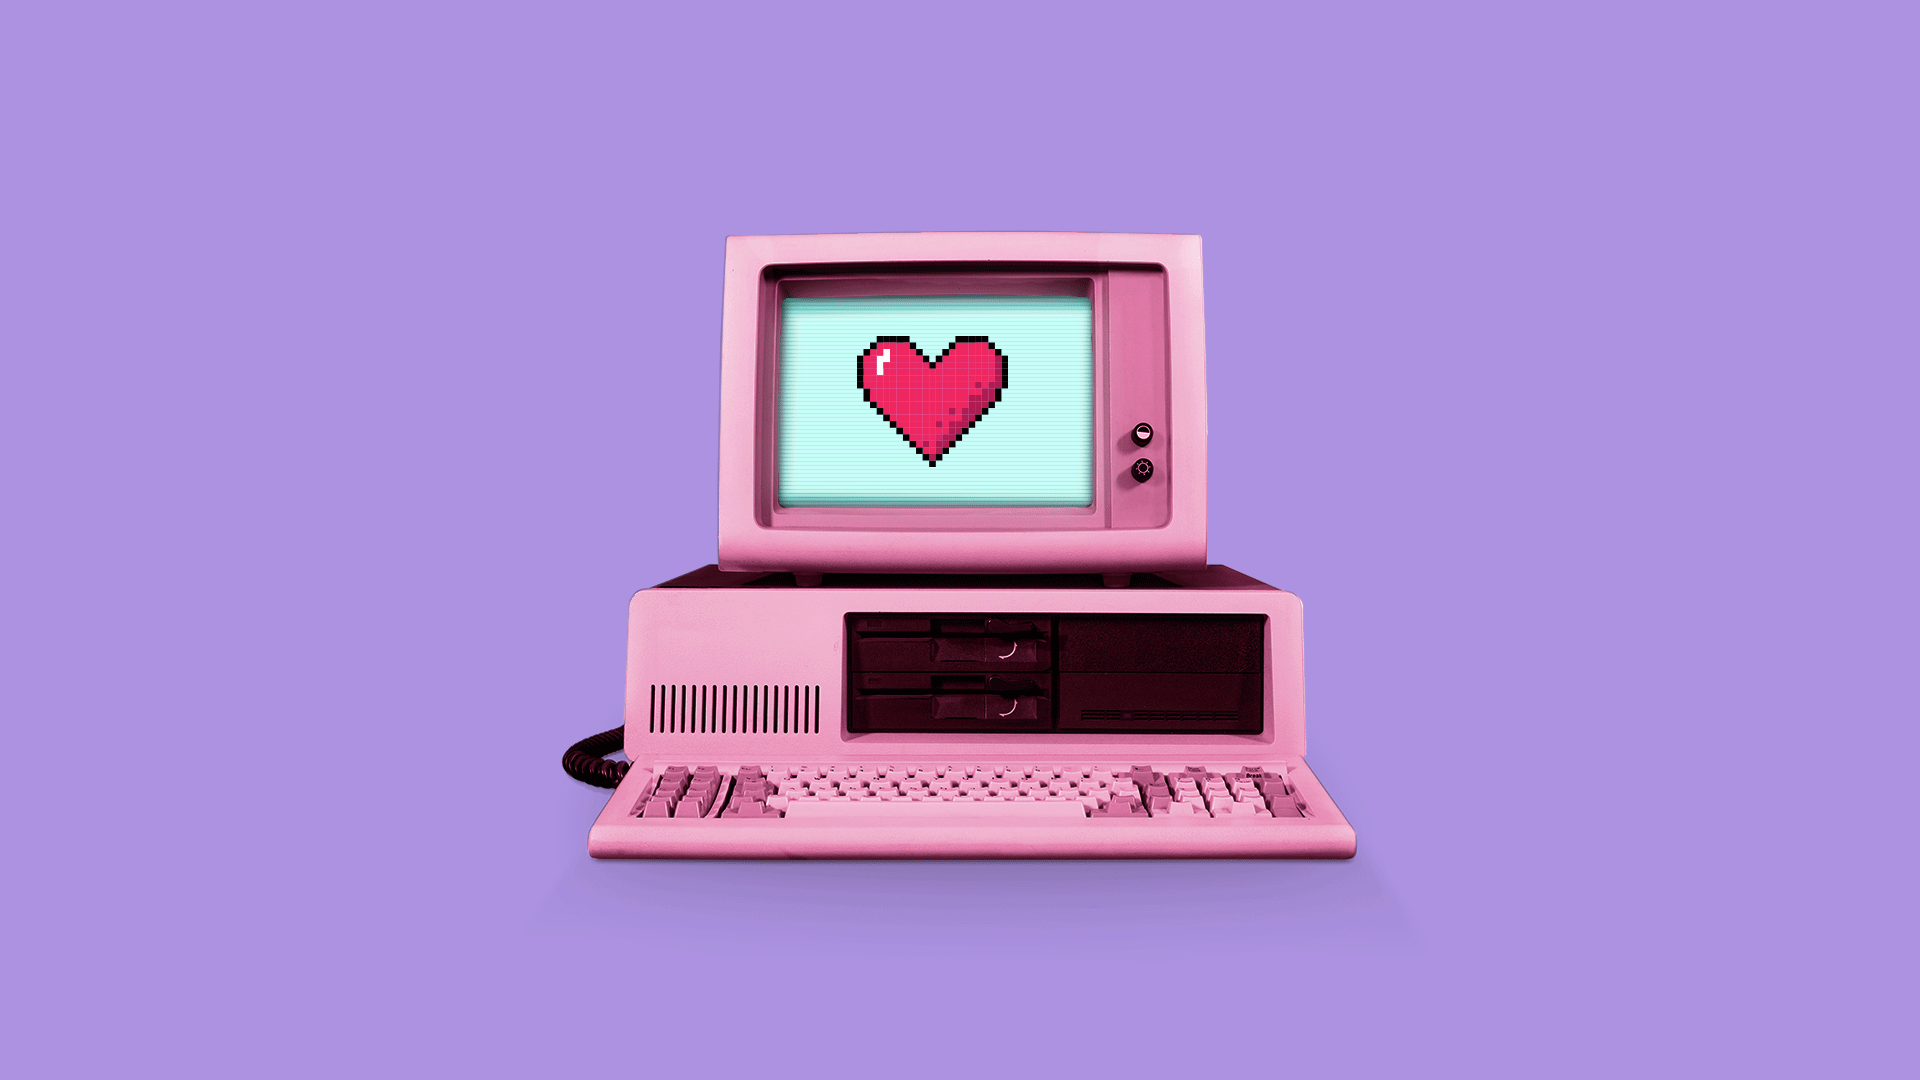 Exploding heart on a computer screen